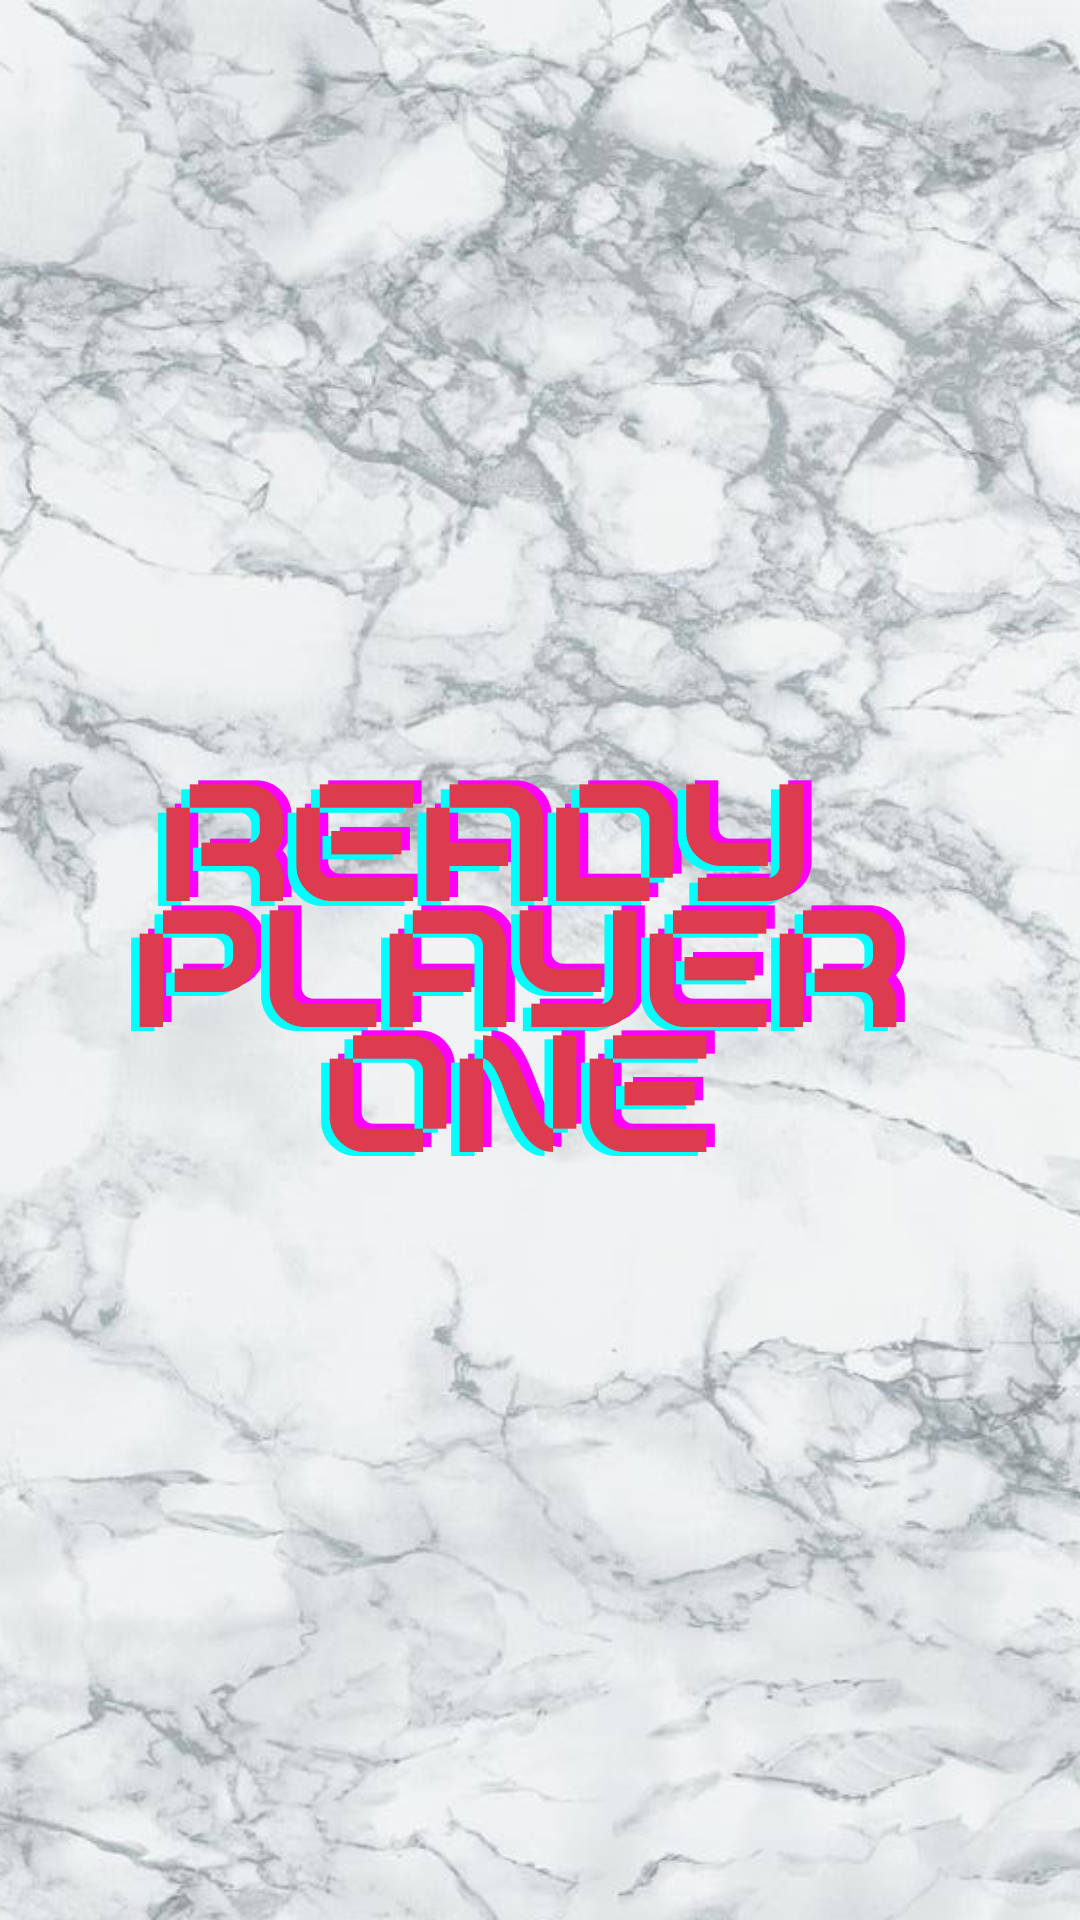 Ready Player One On White Marble